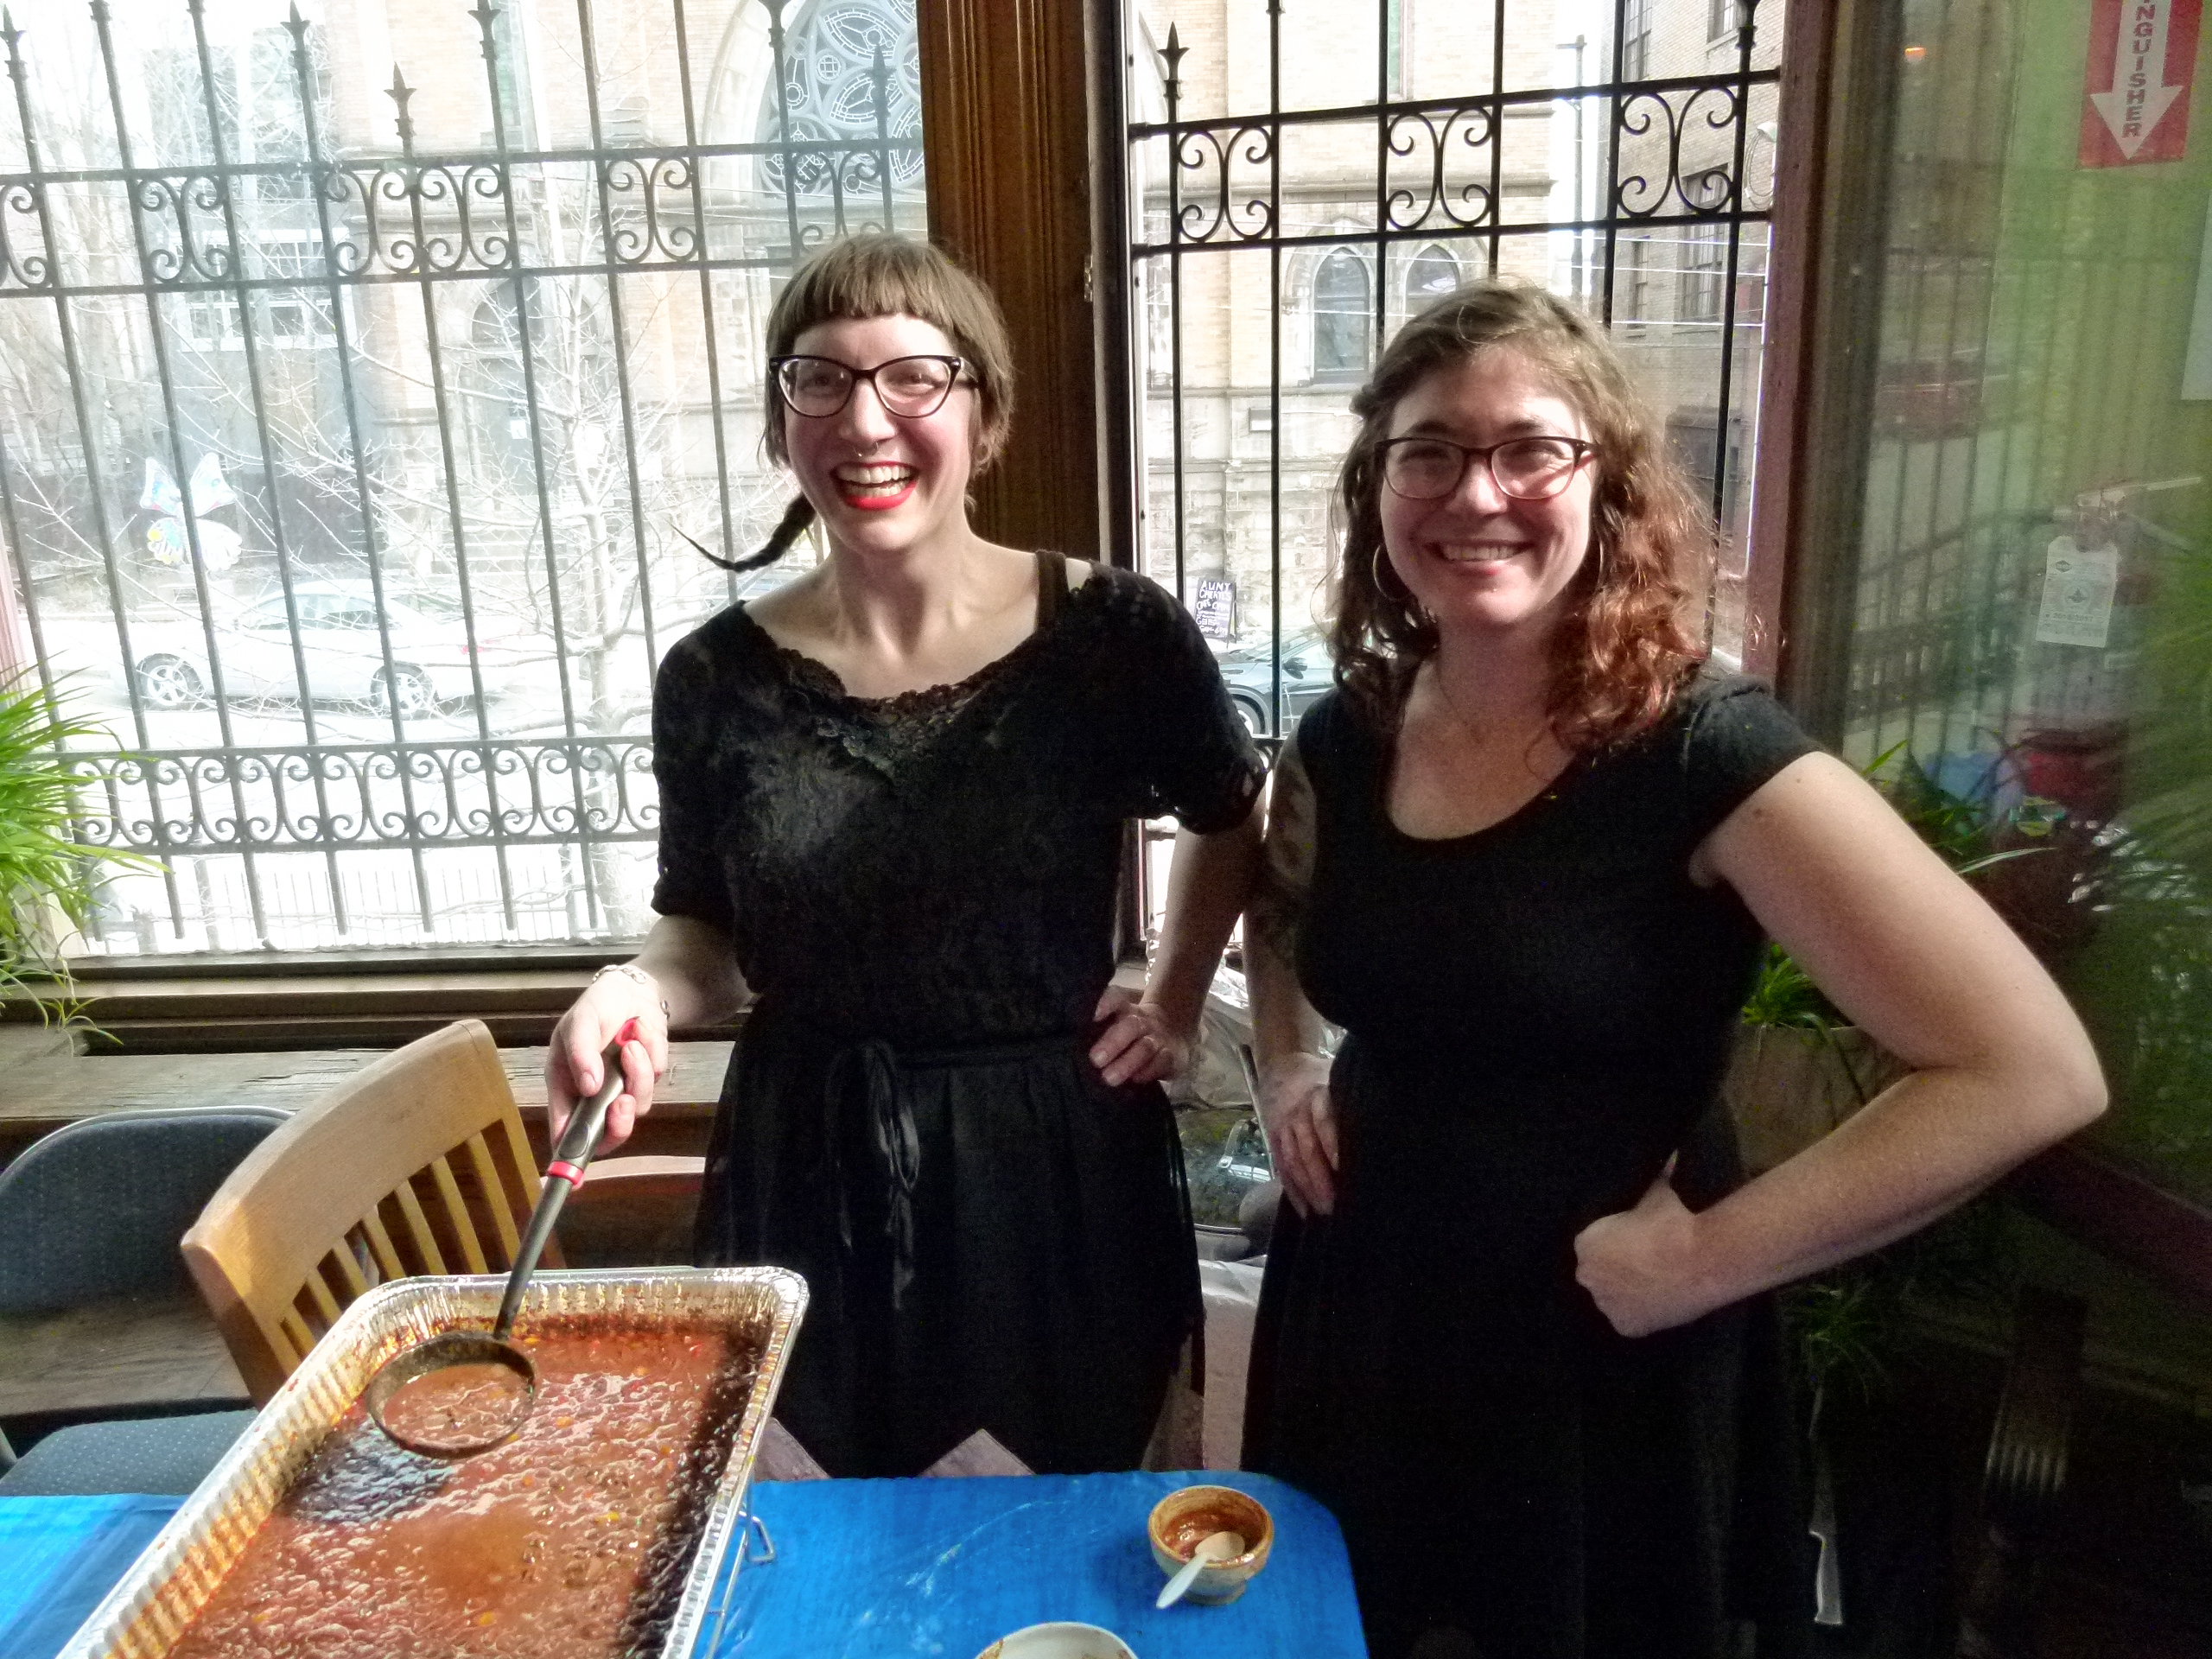 Hipsters make great chili too. Grizzemily (l.) is ready to scoop some of their Holy Mole! chili into a bowl while Katie Johnson (r.) stands ready to assist.